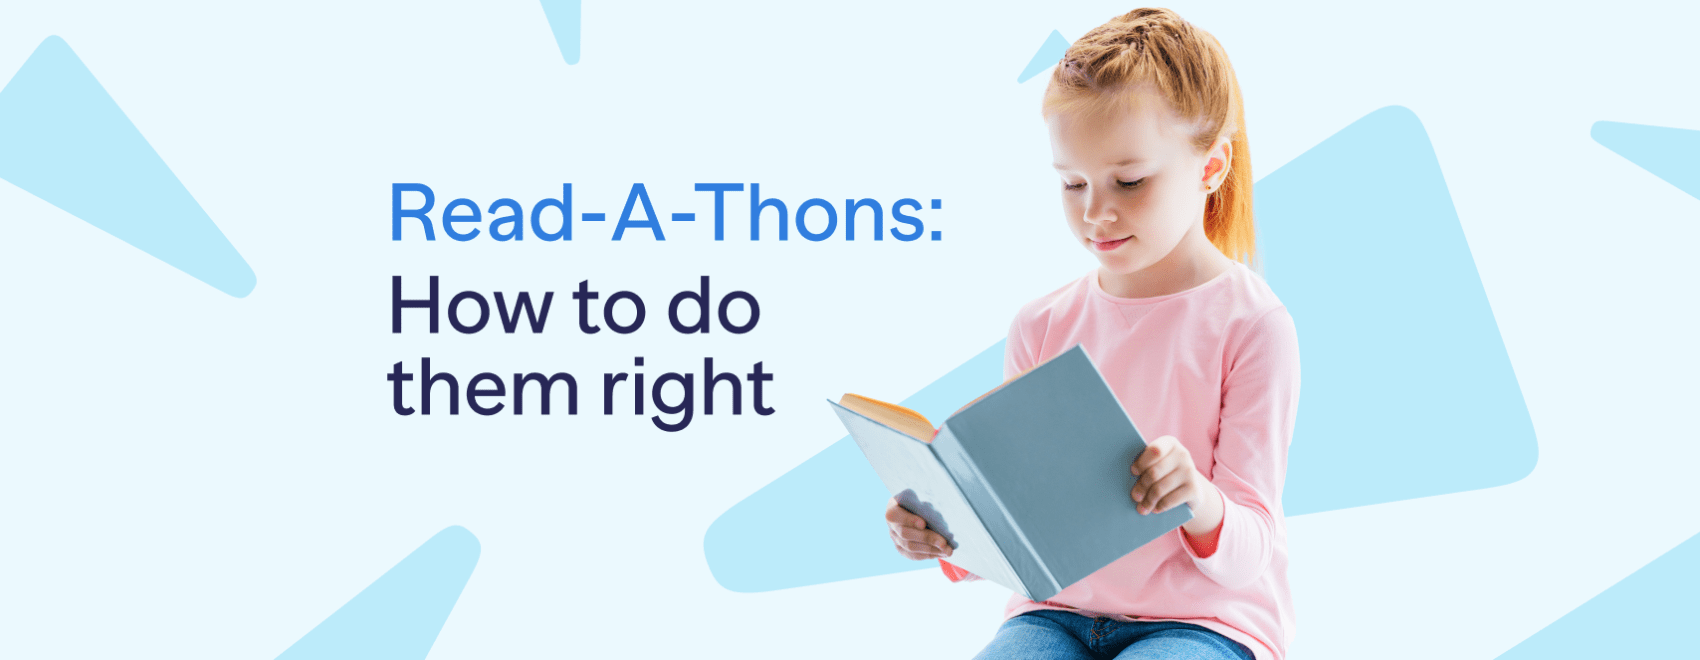 Read-a-thon article